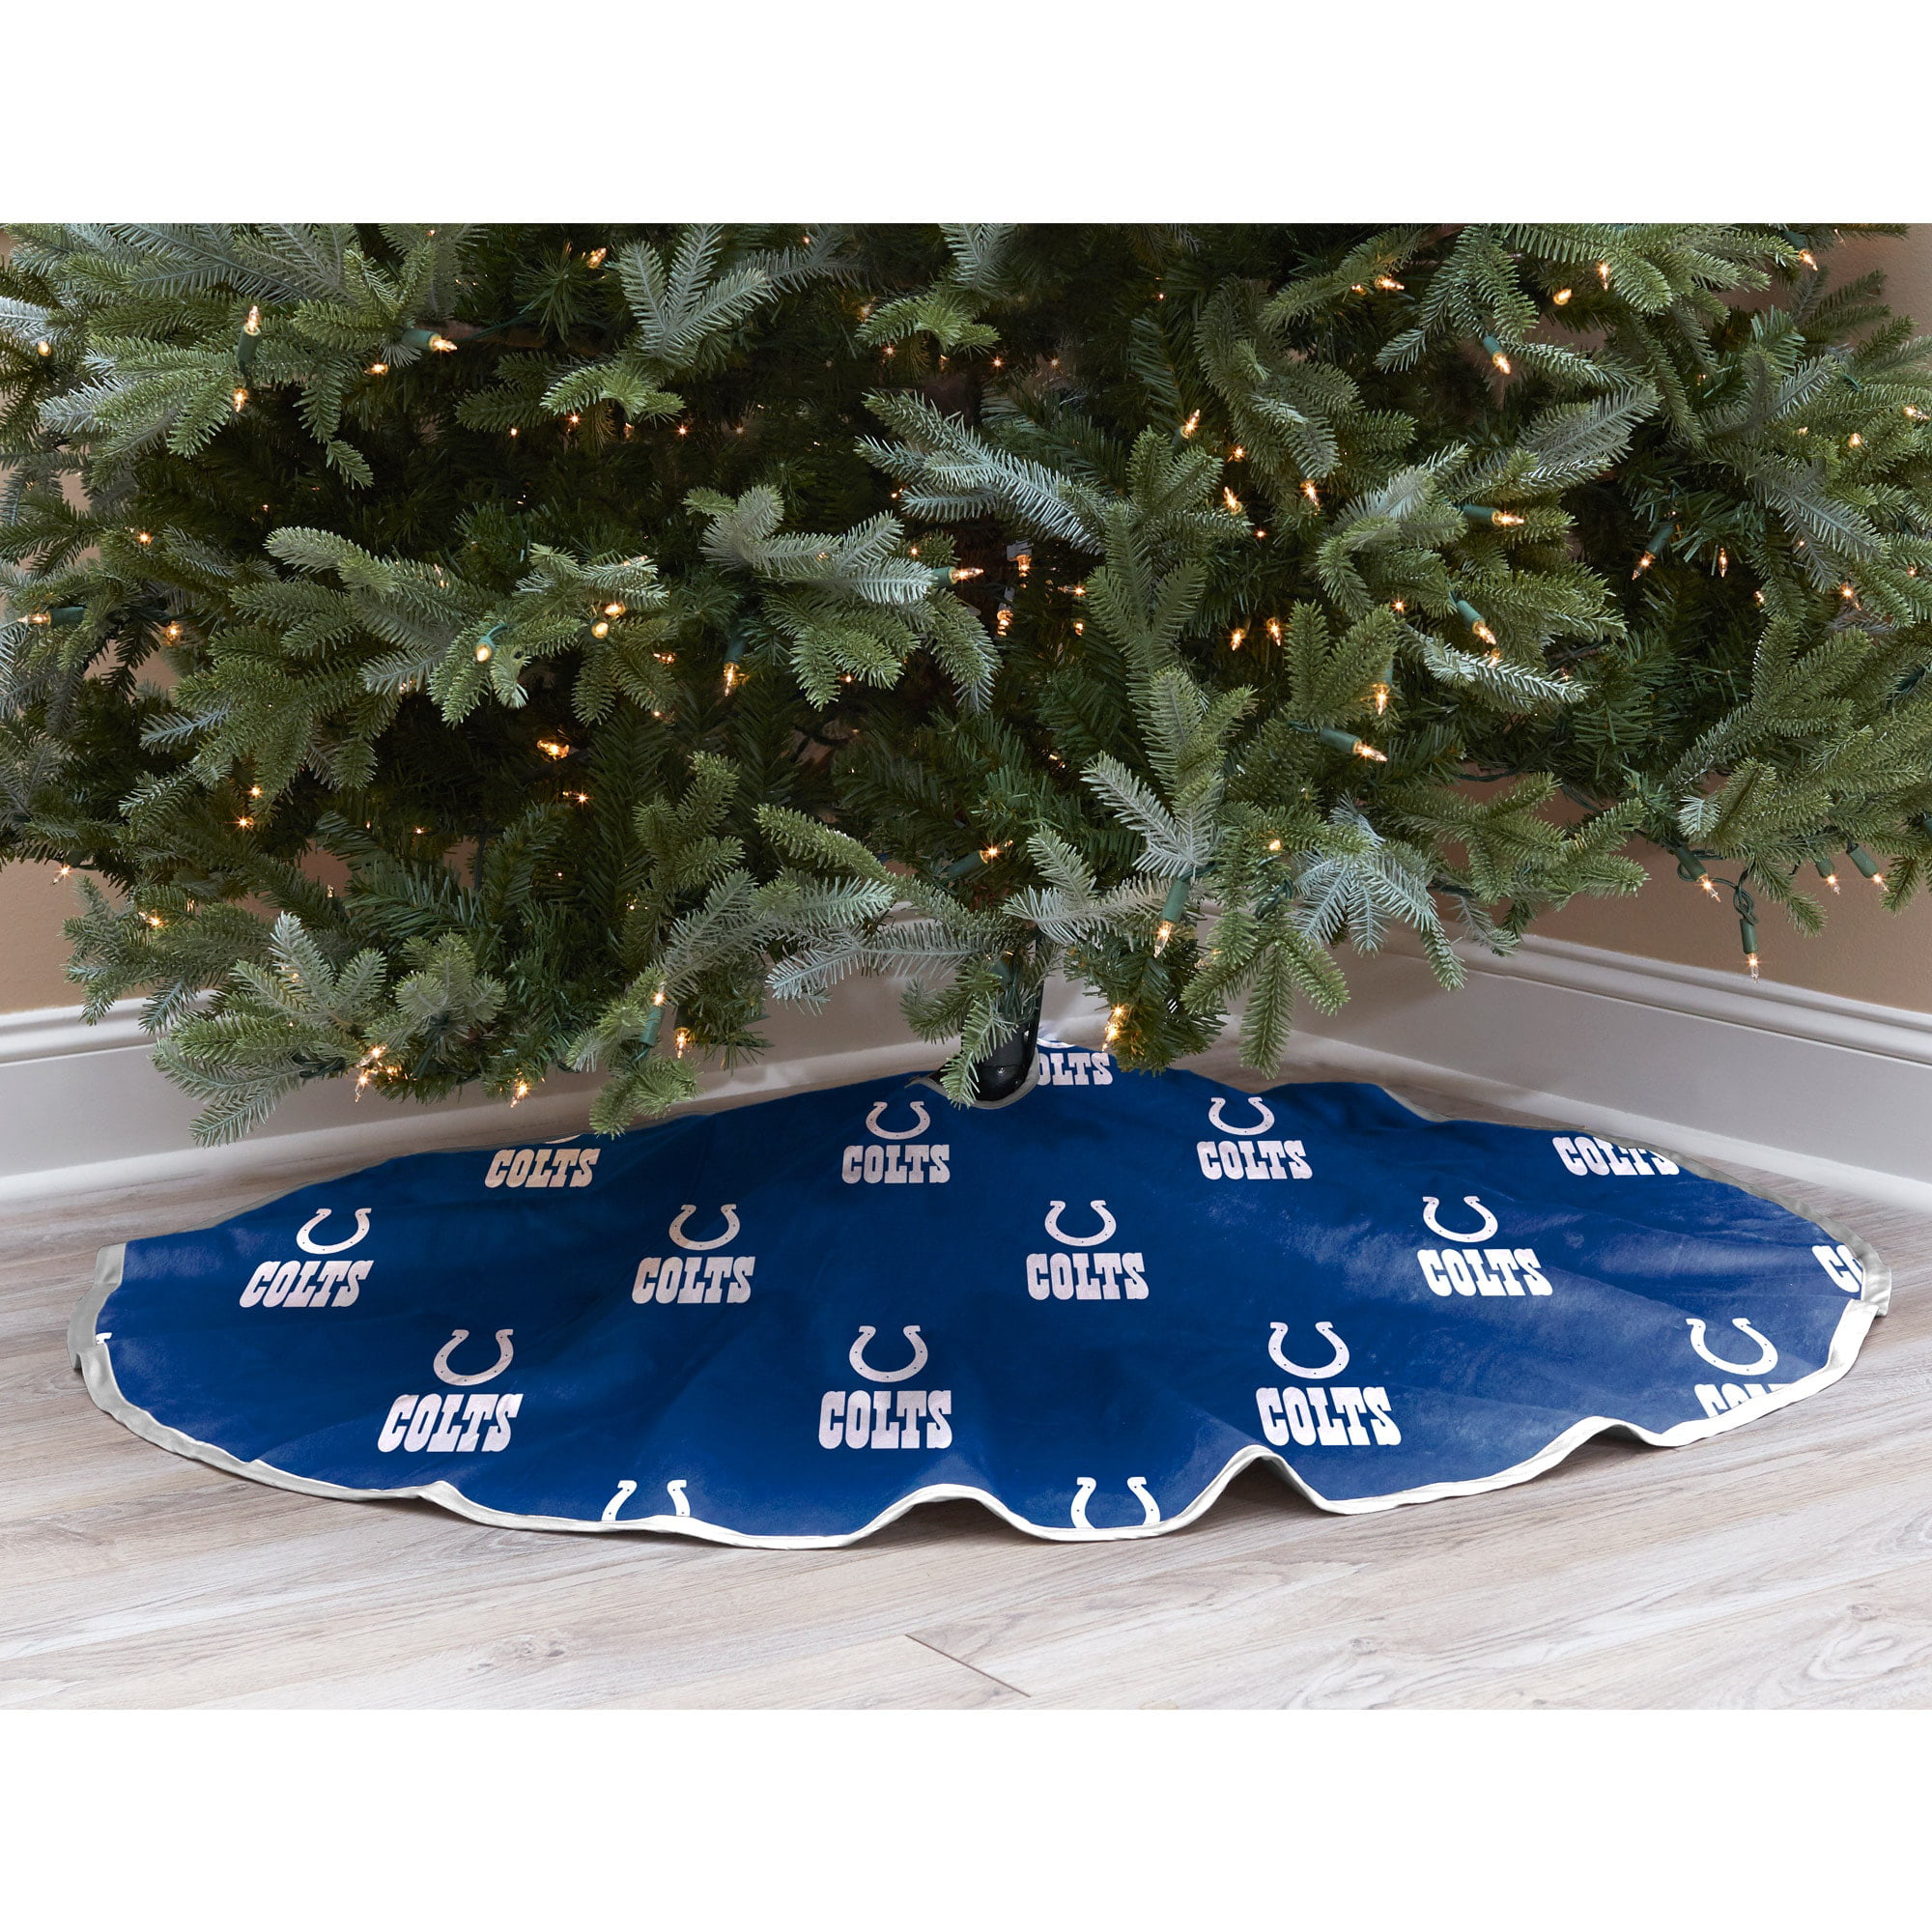 Science Classroom Decor Chemistry Gifts Chemist-Tree Skirts Science Gifts Christmas Tree Skirts Science Decor